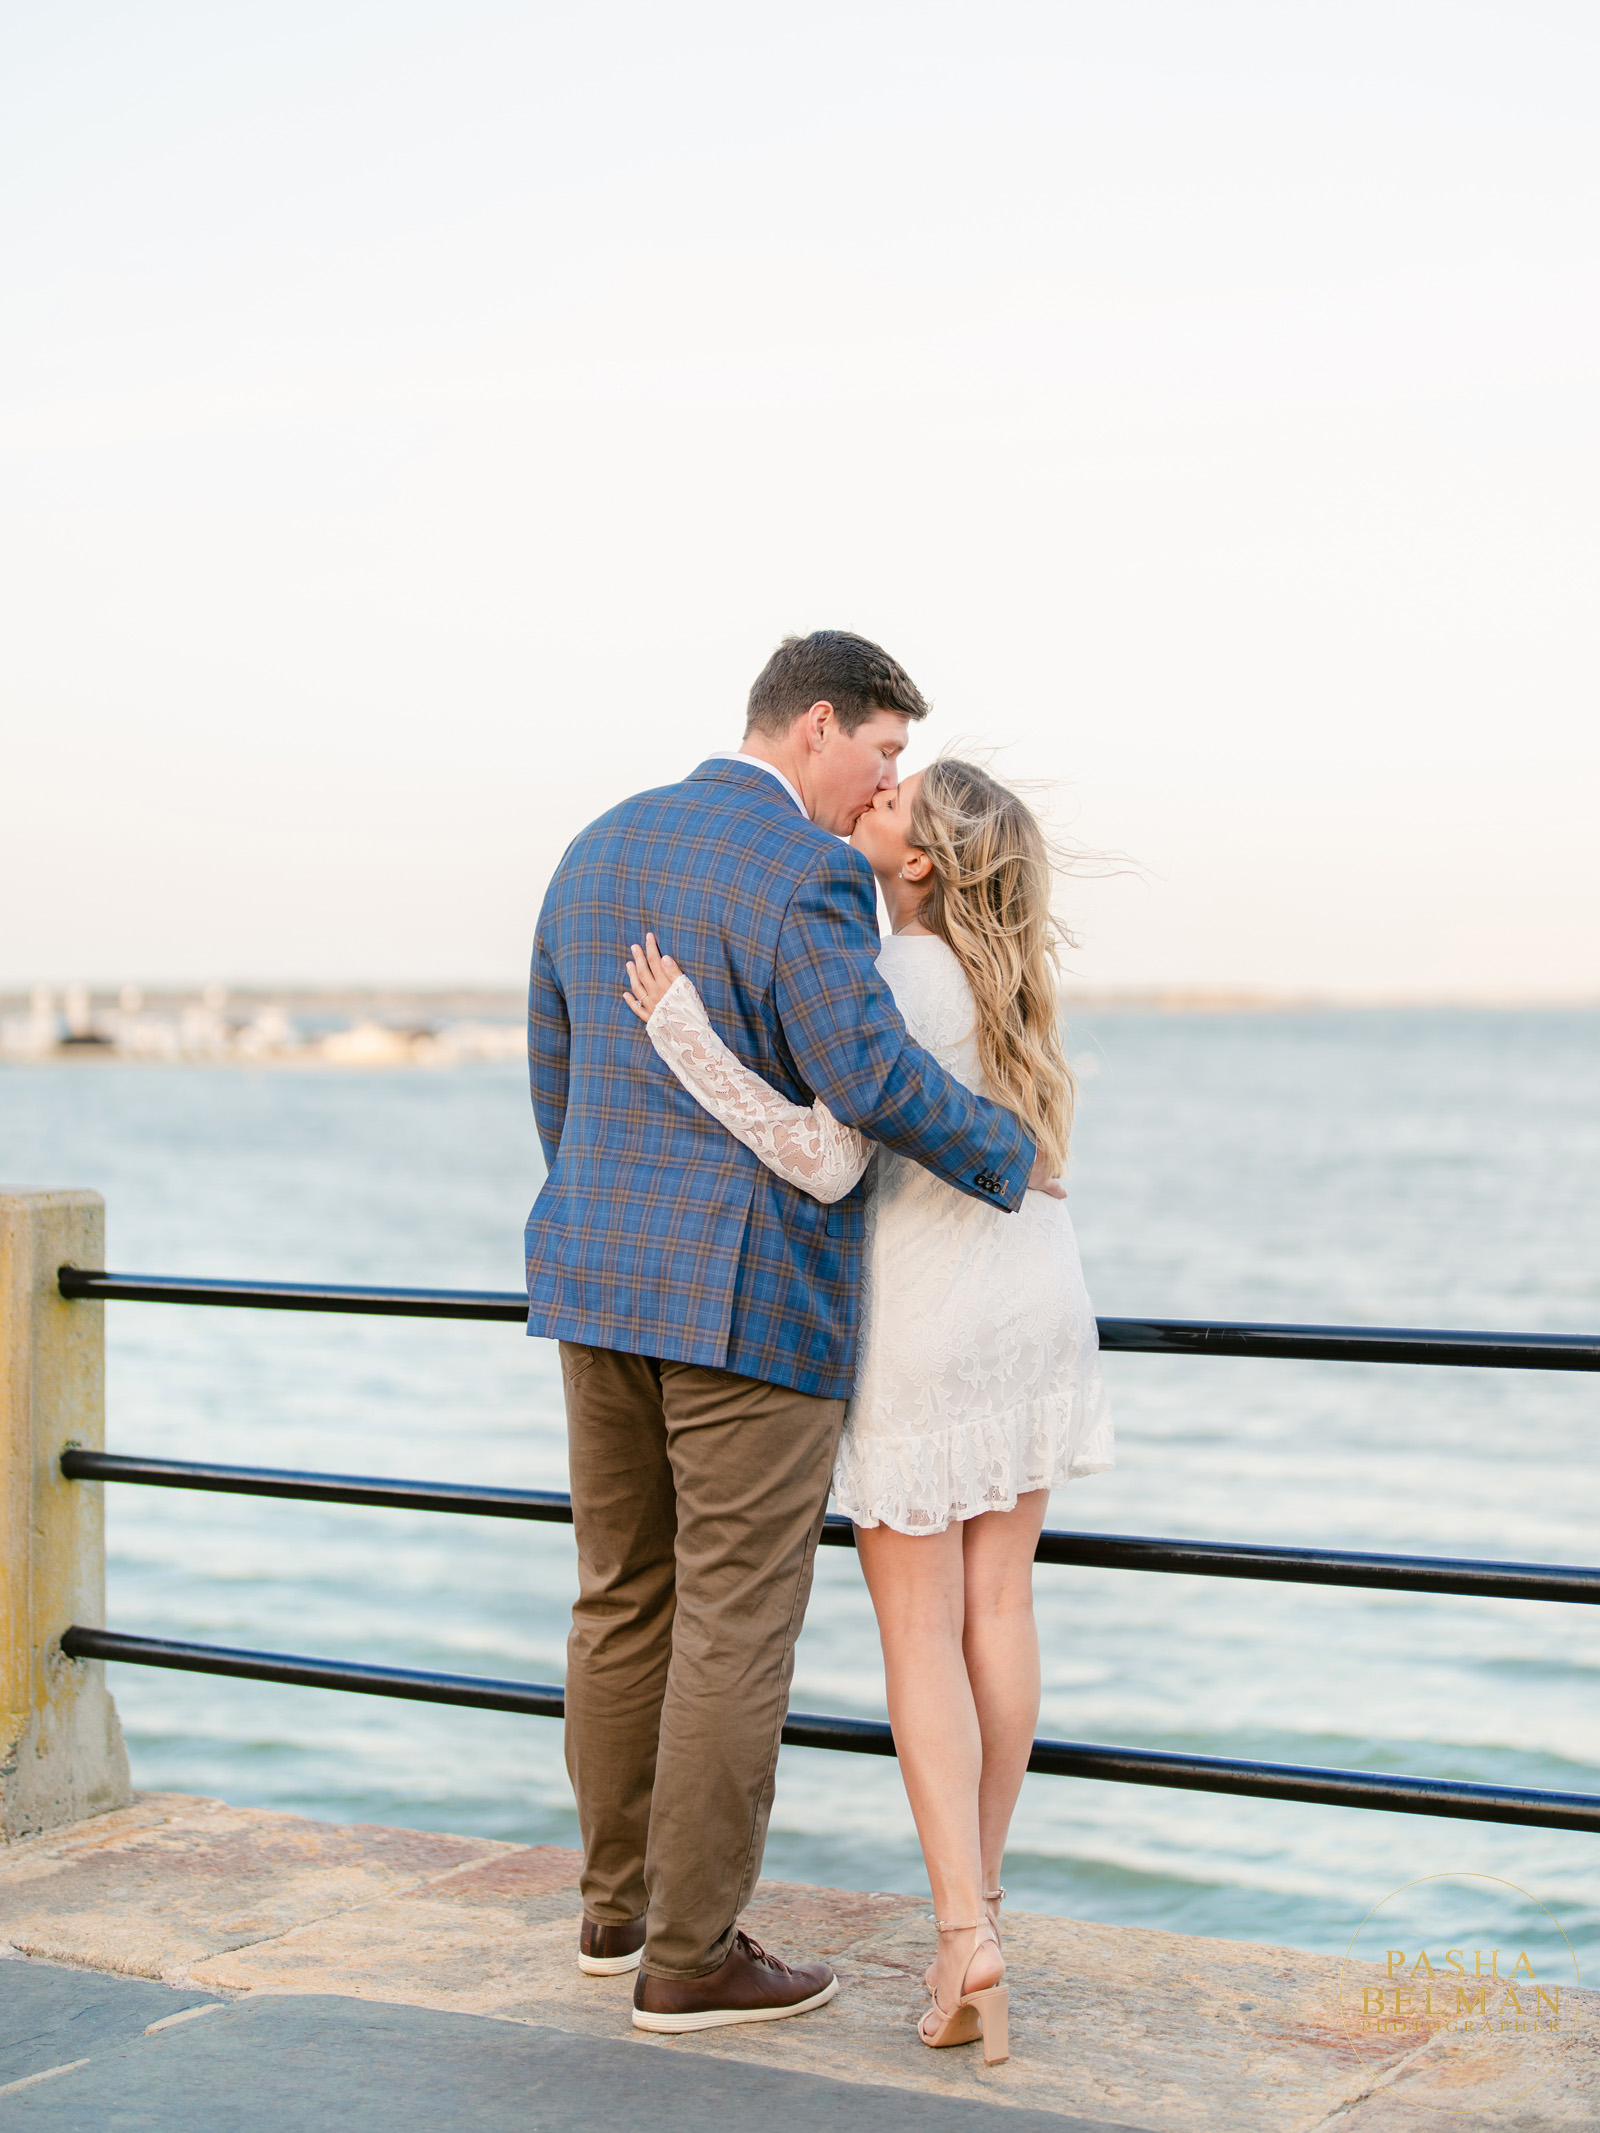 Best Engagement Locations in Charleston, SC - Charleston Engagement Pictures 